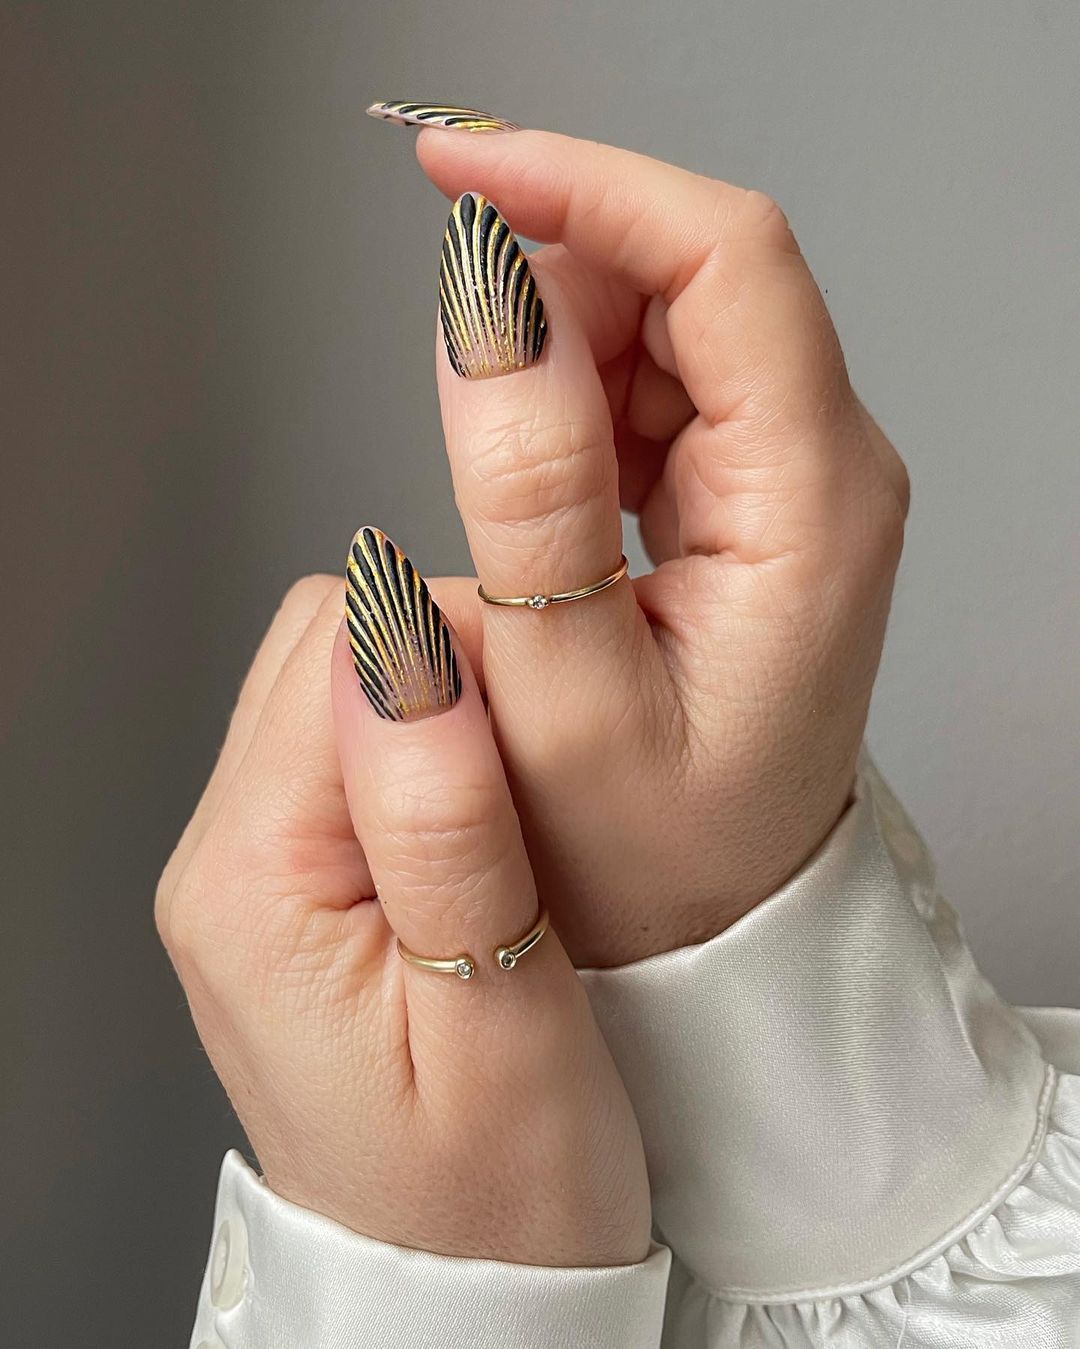 Elegant Nail Art - White and Gold Nail Designs This gold-lined manicure  takes white nail polish to the next level. Using a metallic gold varnish,  you can carefully paint geometric lines across